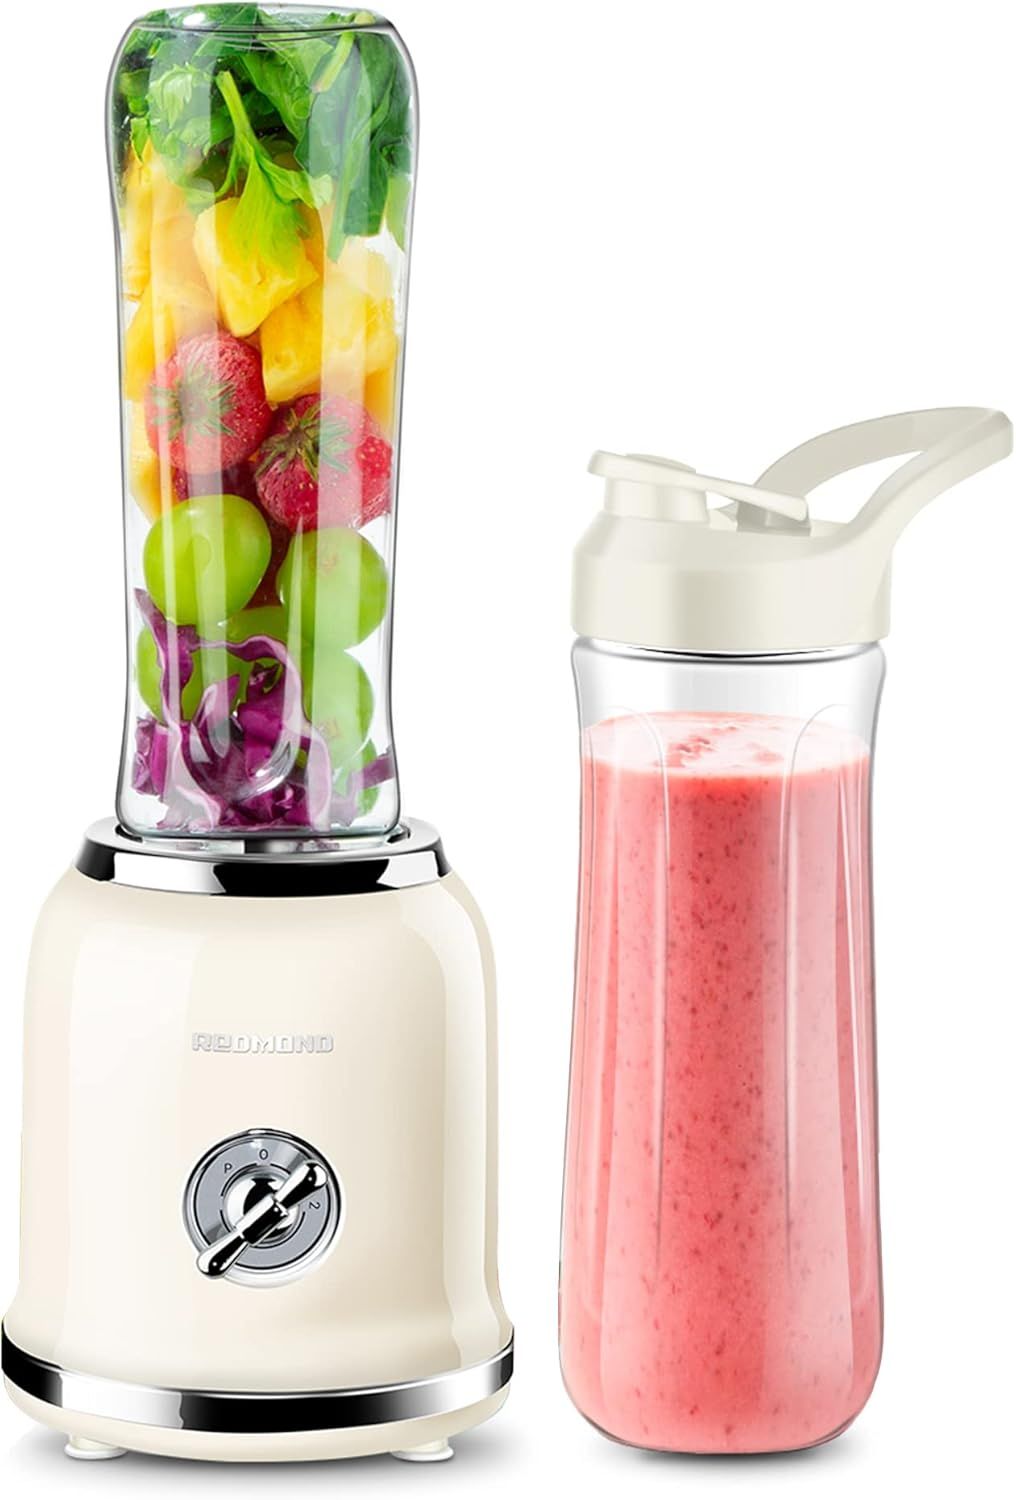 Personal Blender, REDMOND Powerful Smoothie Blender with 2 Portable Bottle 2 Speed Control & Puls... | Amazon (US)